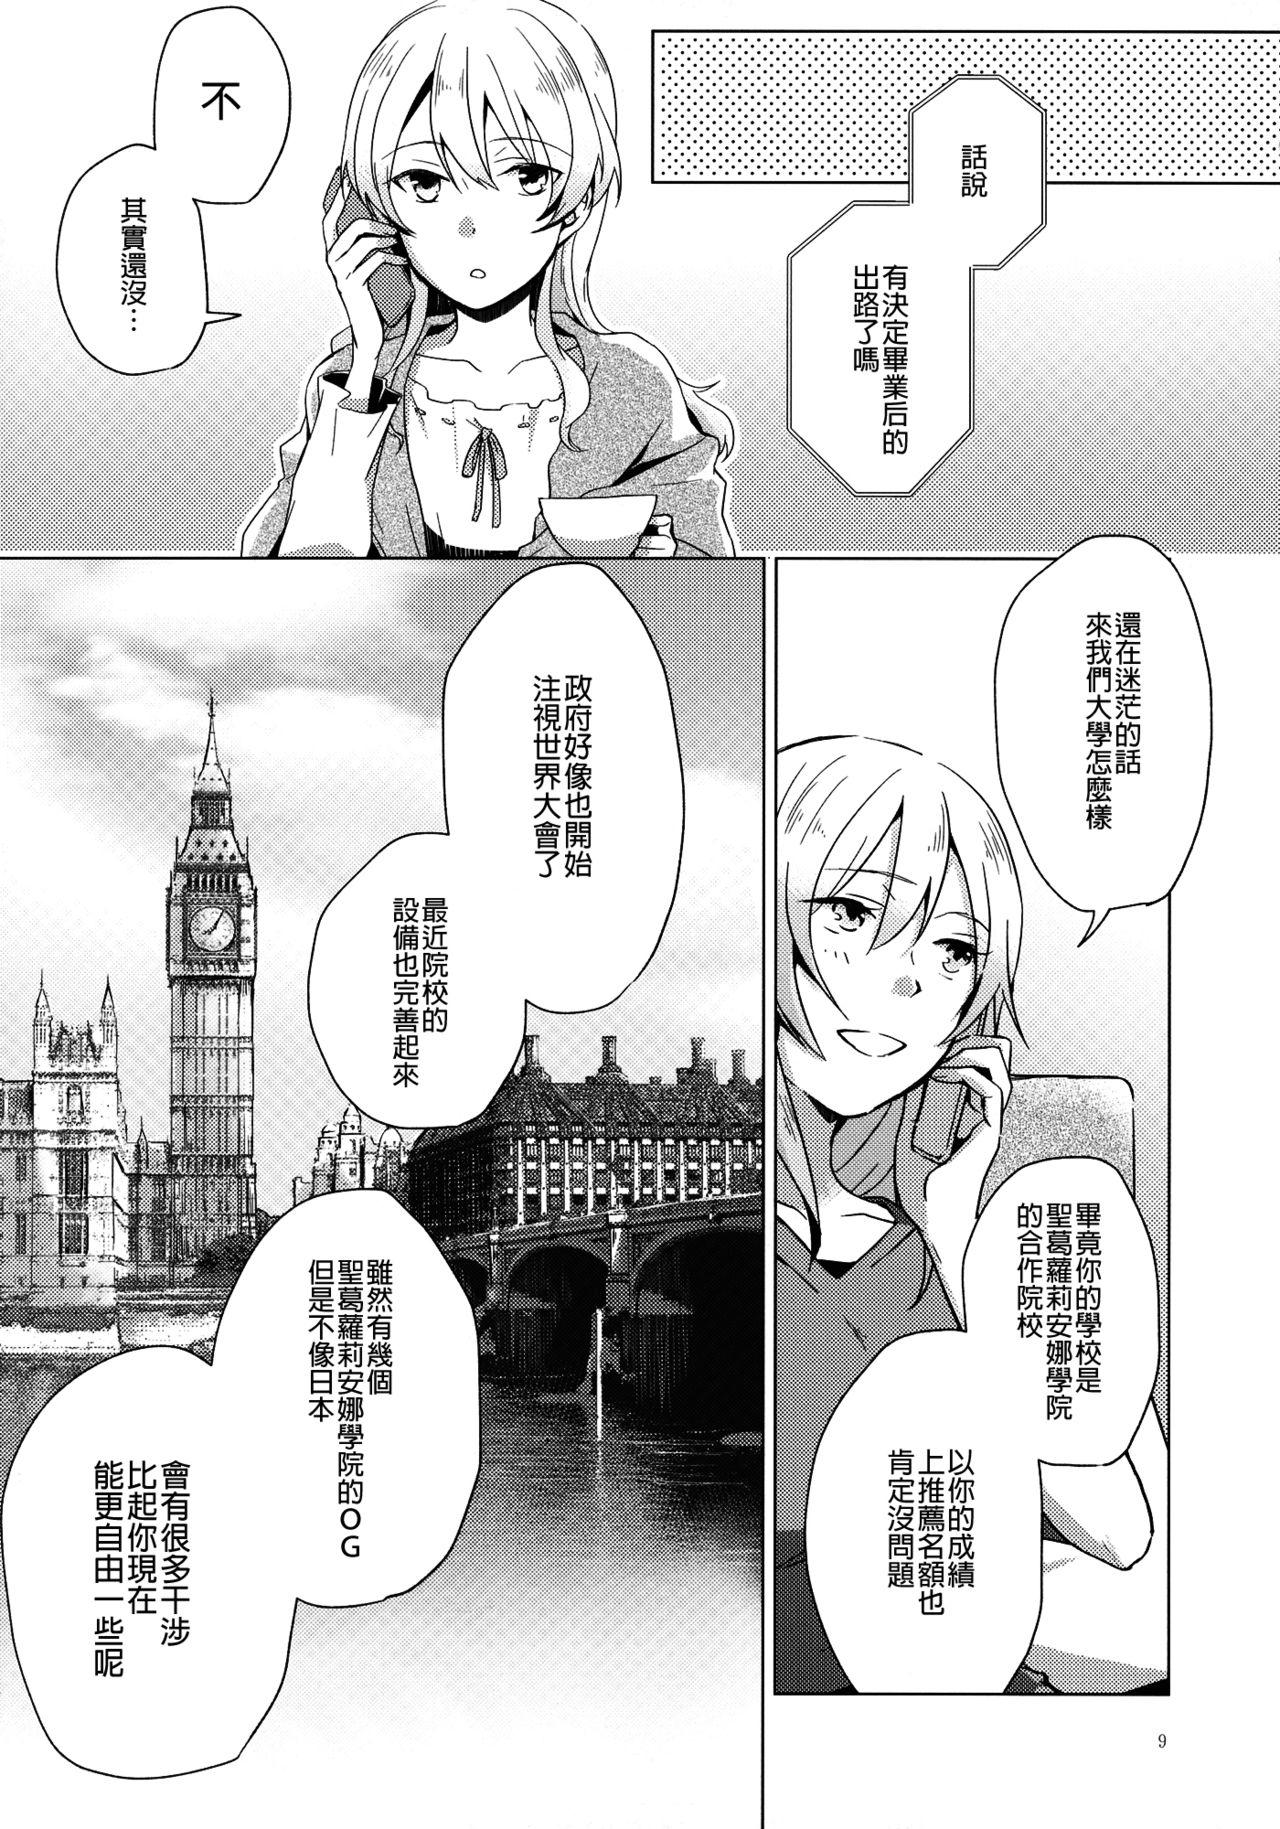 Cum Inside Over Time | 超時 - Girls und panzer Muscle - Page 9